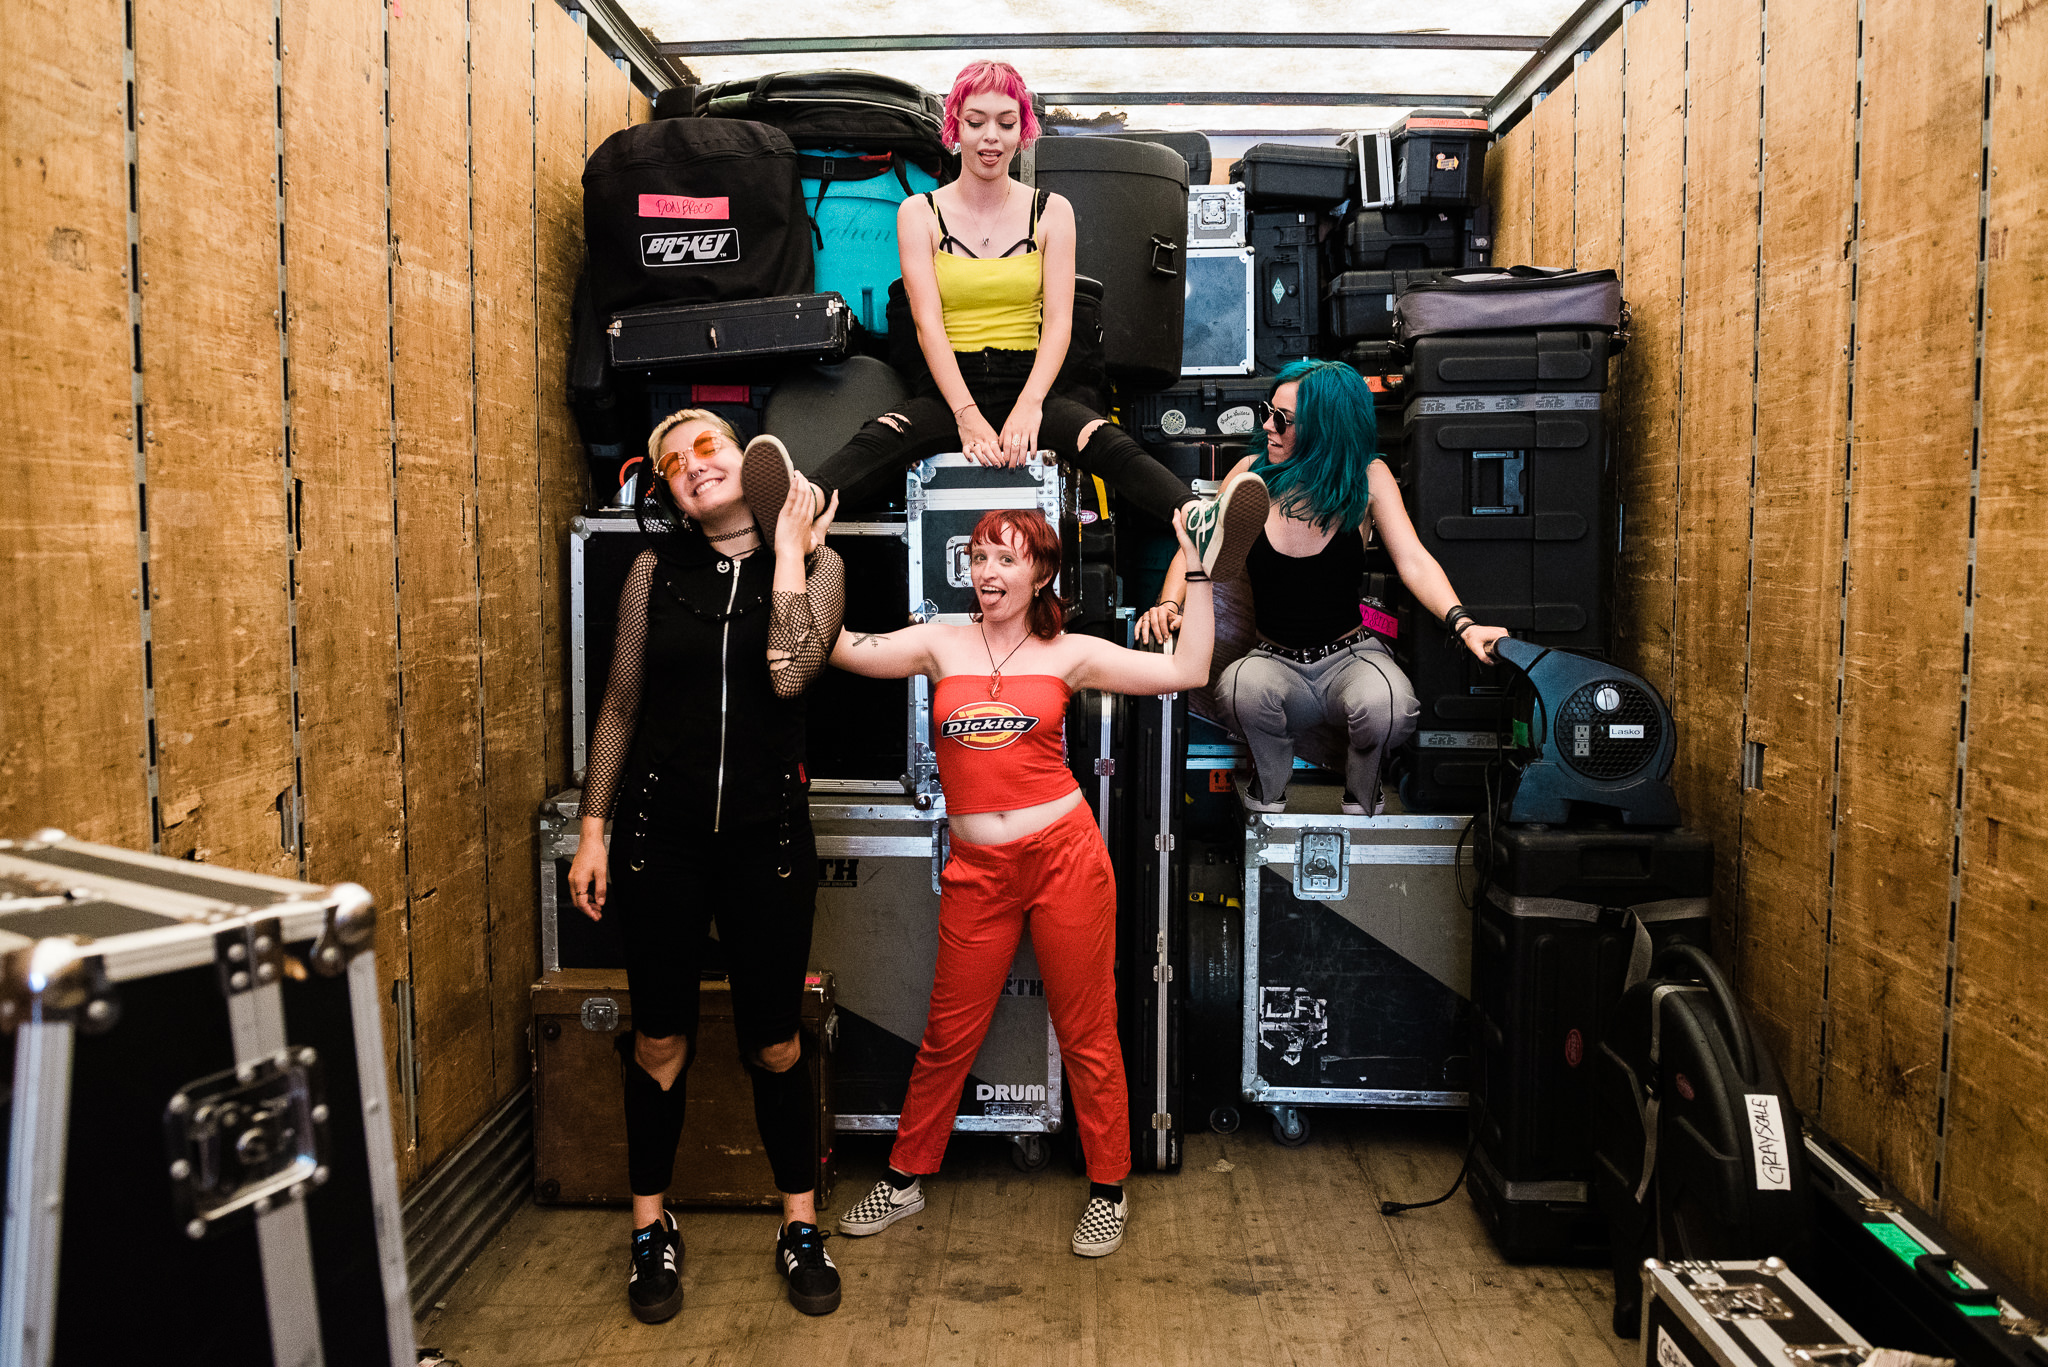 Doll Skin Warped Tour 2018 PNC Bank Arts Center Holmdel NJ Stars and Scars Photo